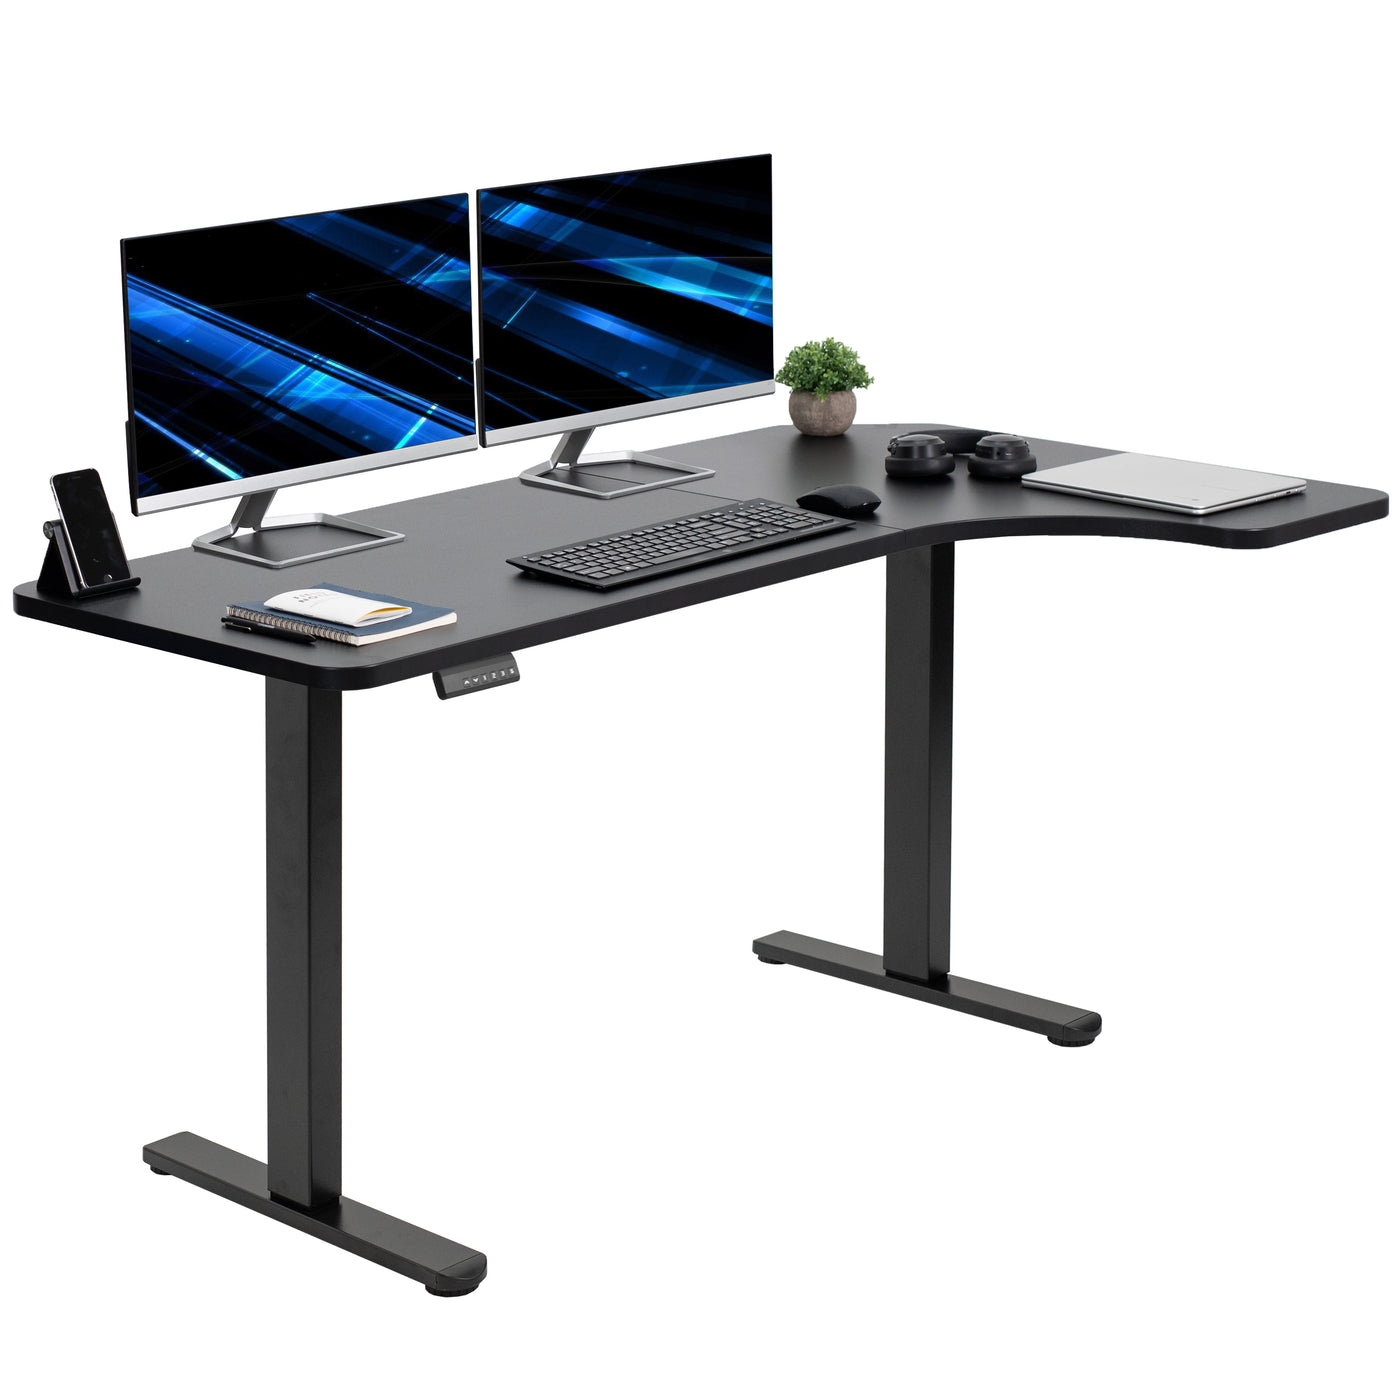 Extended curved desk with height adjustments.